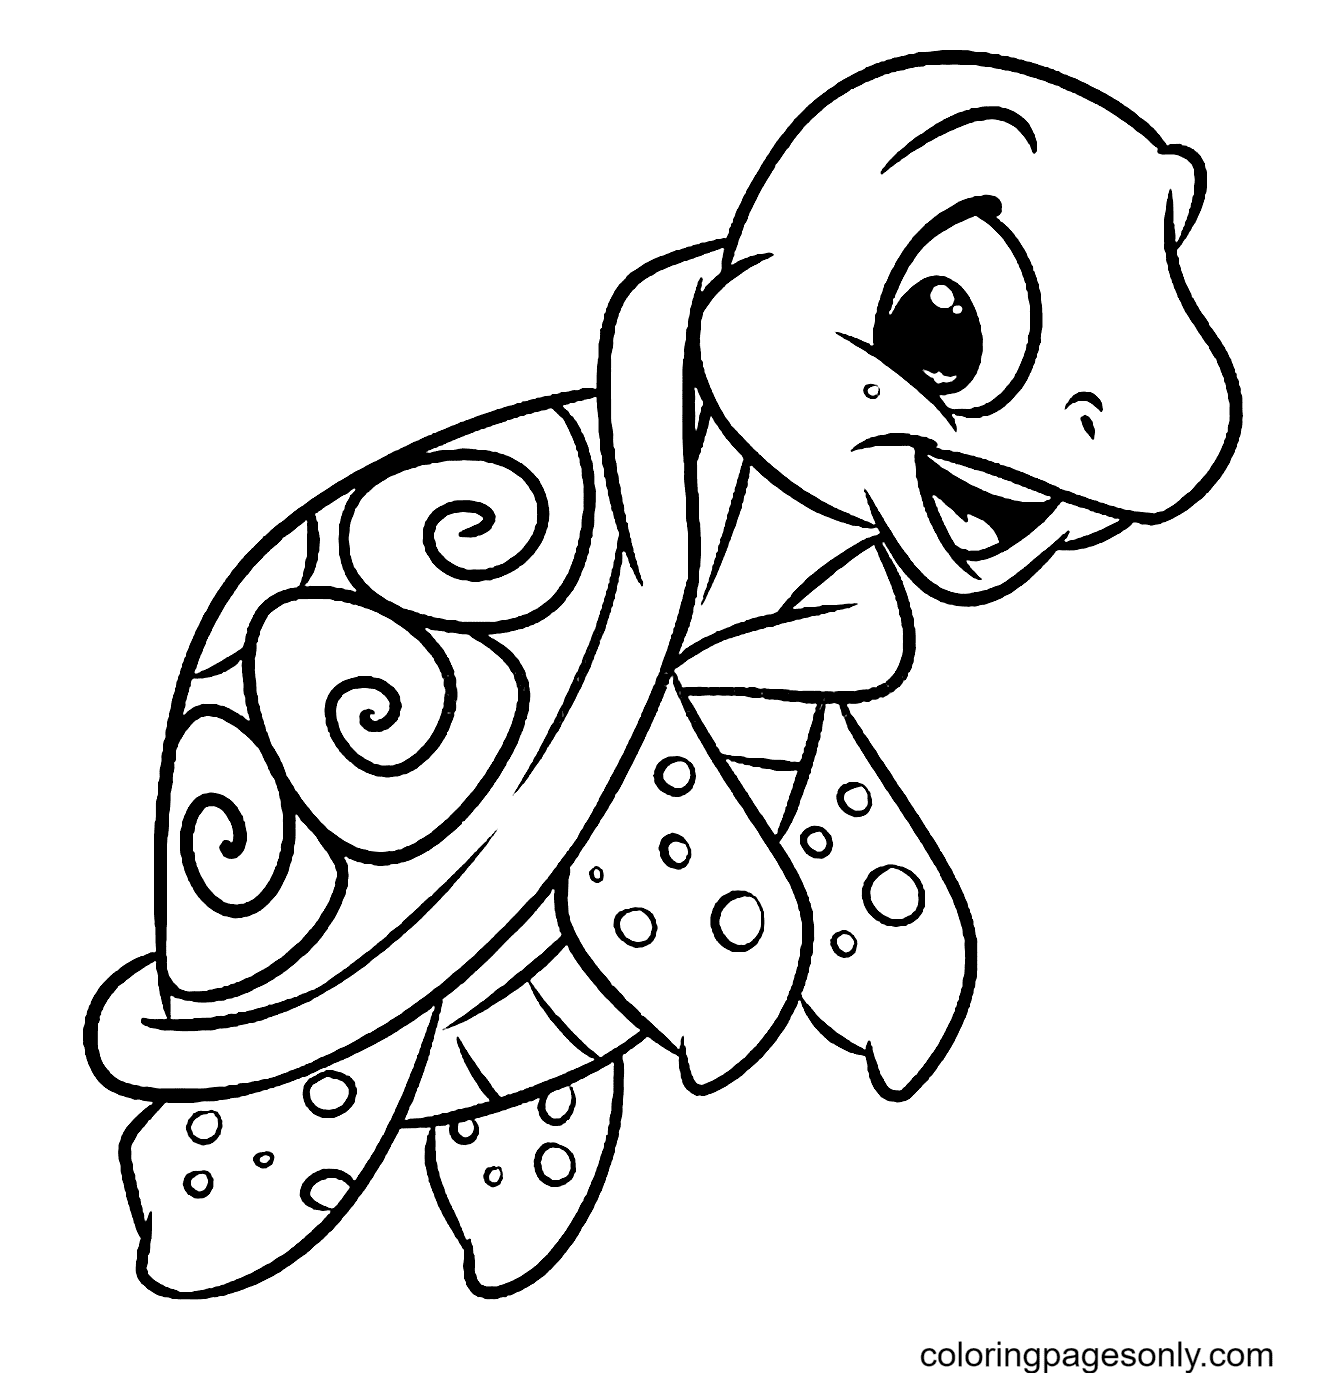 Cute Turtle Free Coloring Page